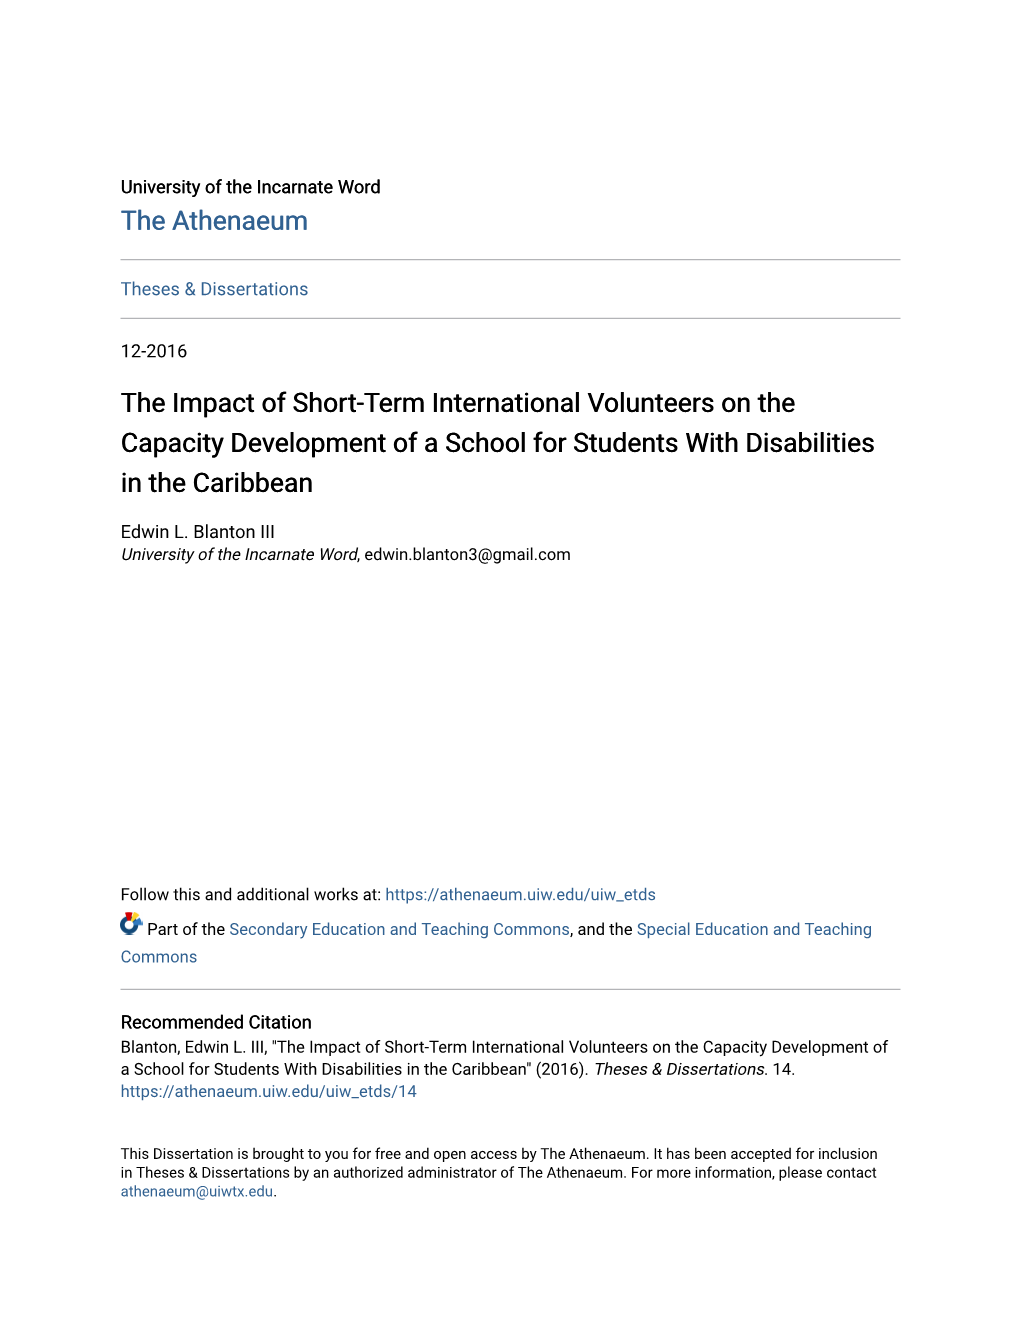 The Impact of Short-Term International Volunteers on the Capacity Development of a School for Students with Disabilities in the Caribbean